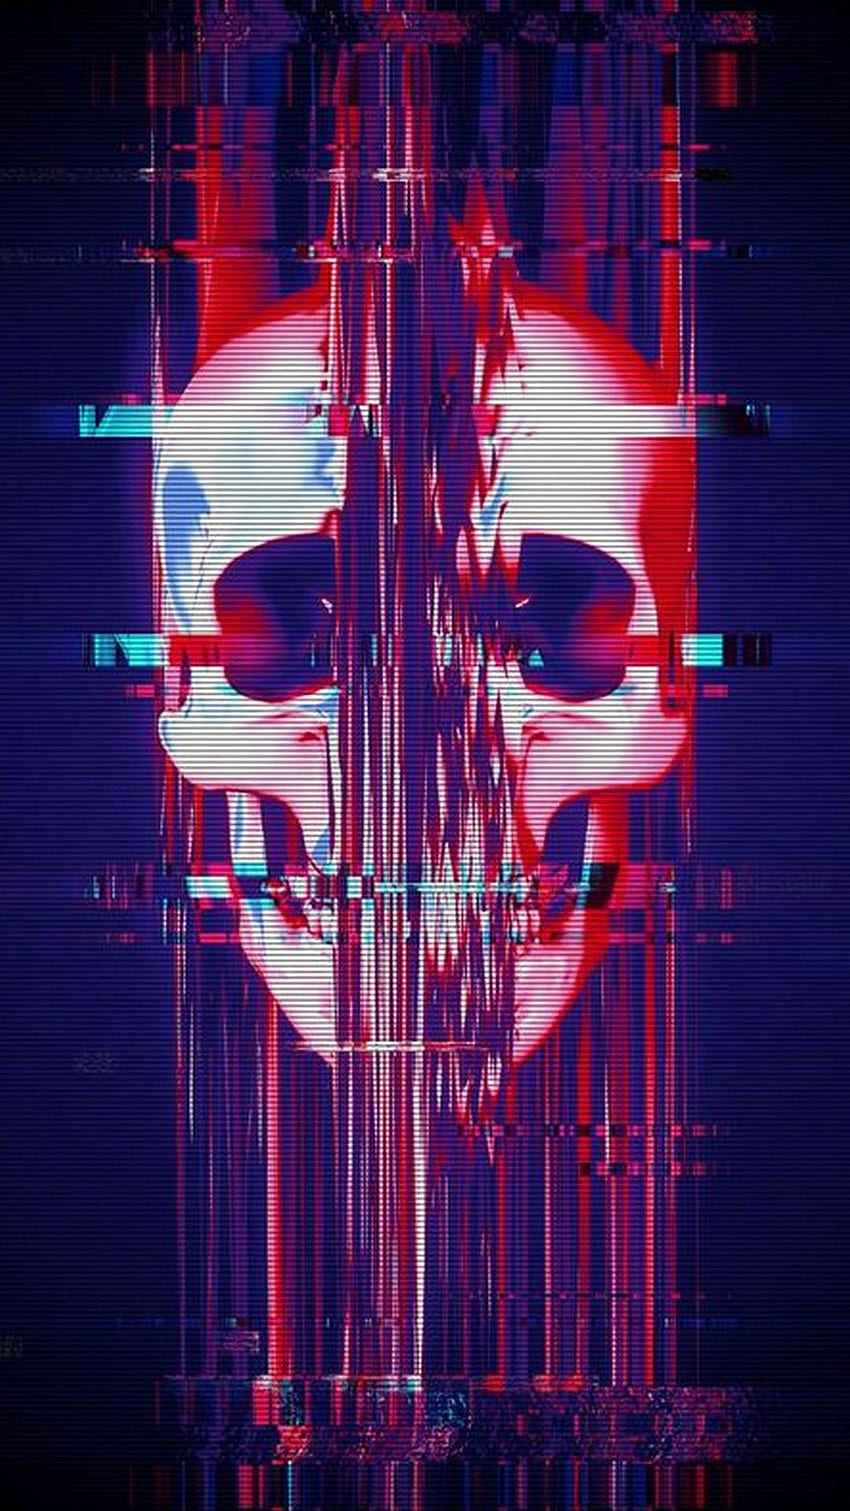 Glitch art Effect for Android, Glitch City HD phone wallpaper